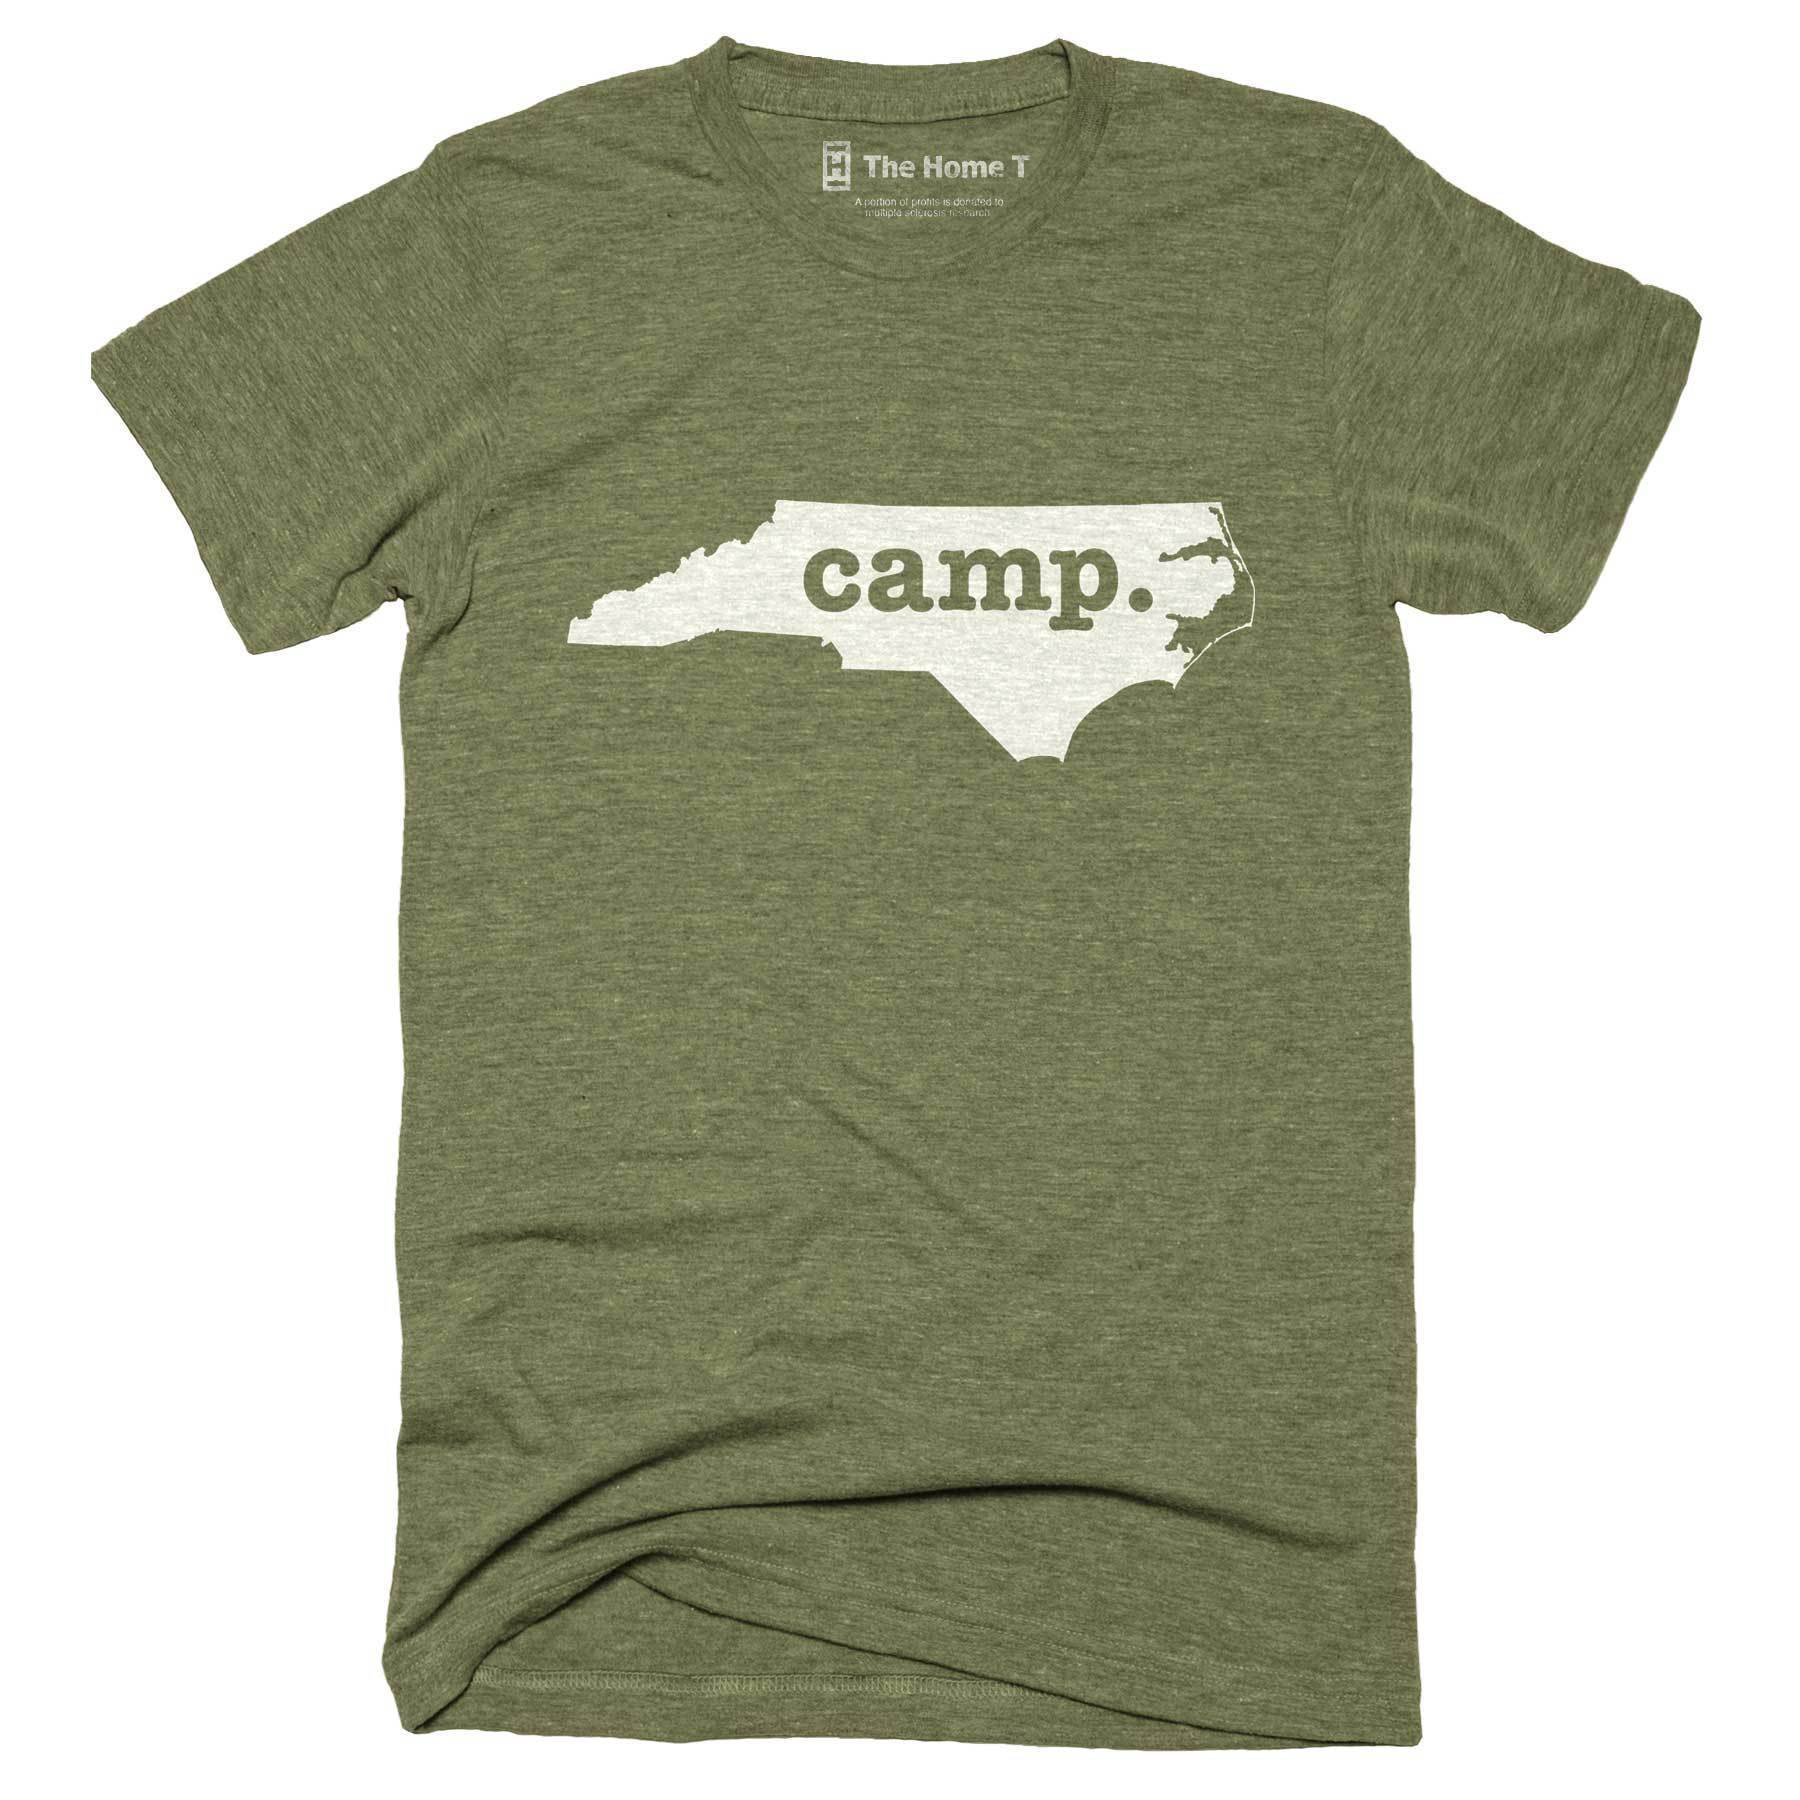 North Carolina Camp Home T-Shirt Outdoor Collection The Home T XS Army Green